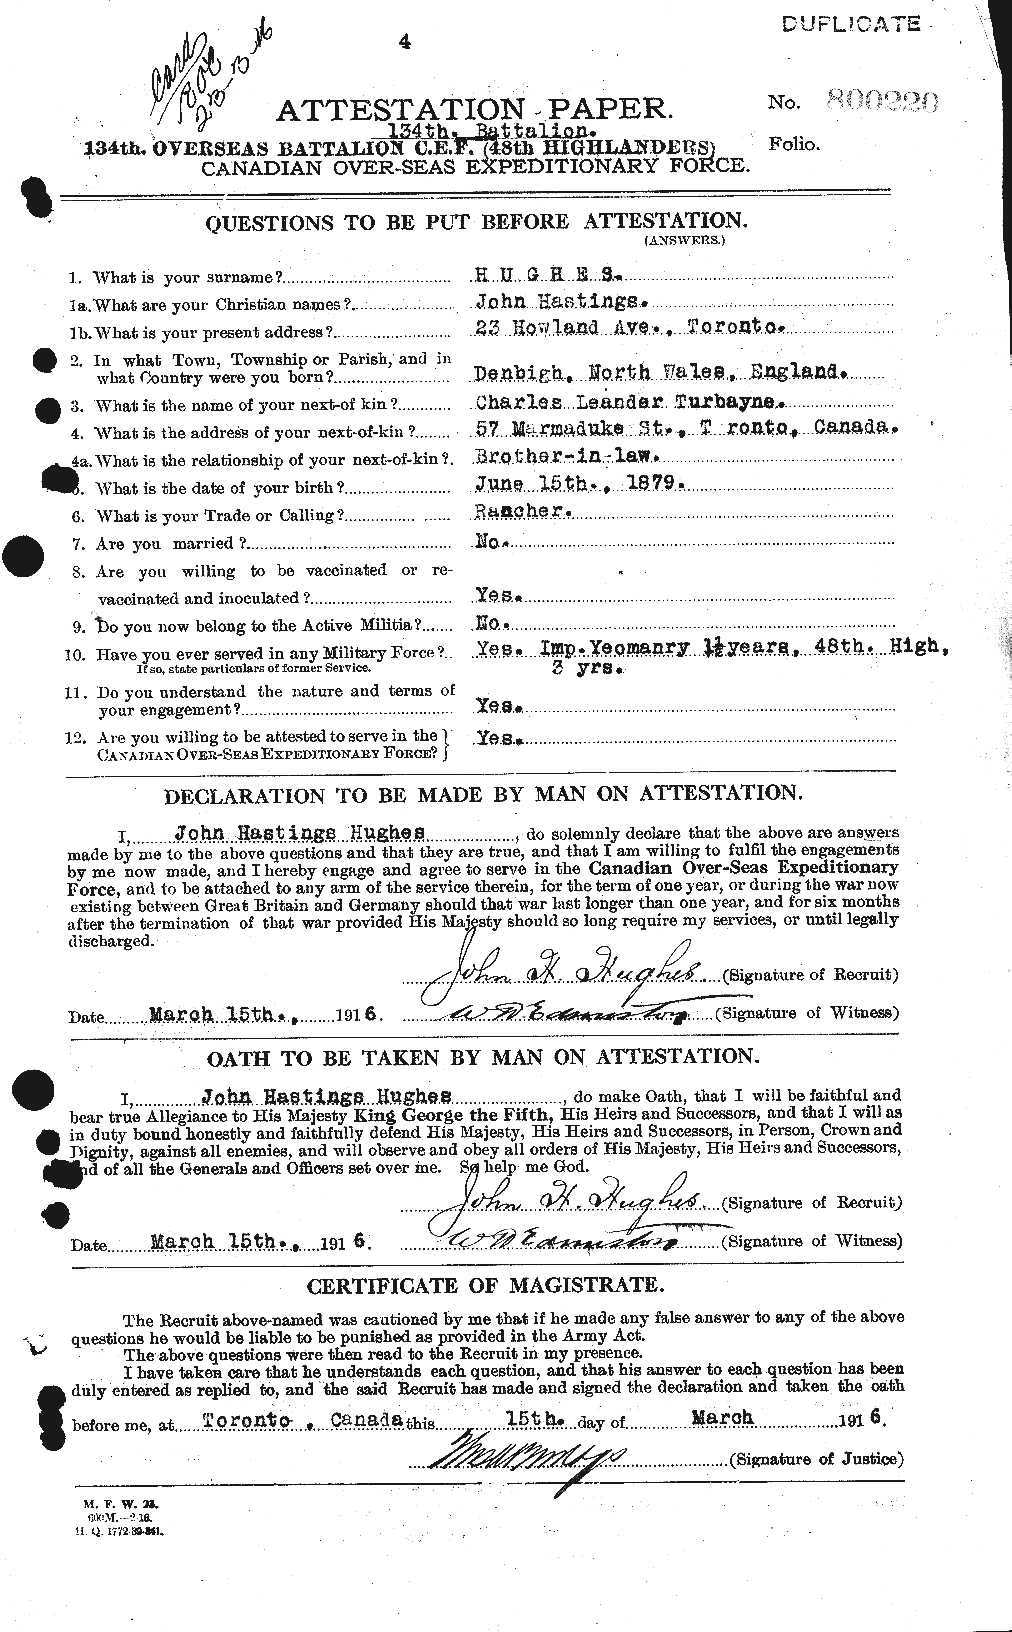 Personnel Records of the First World War - CEF 404025a